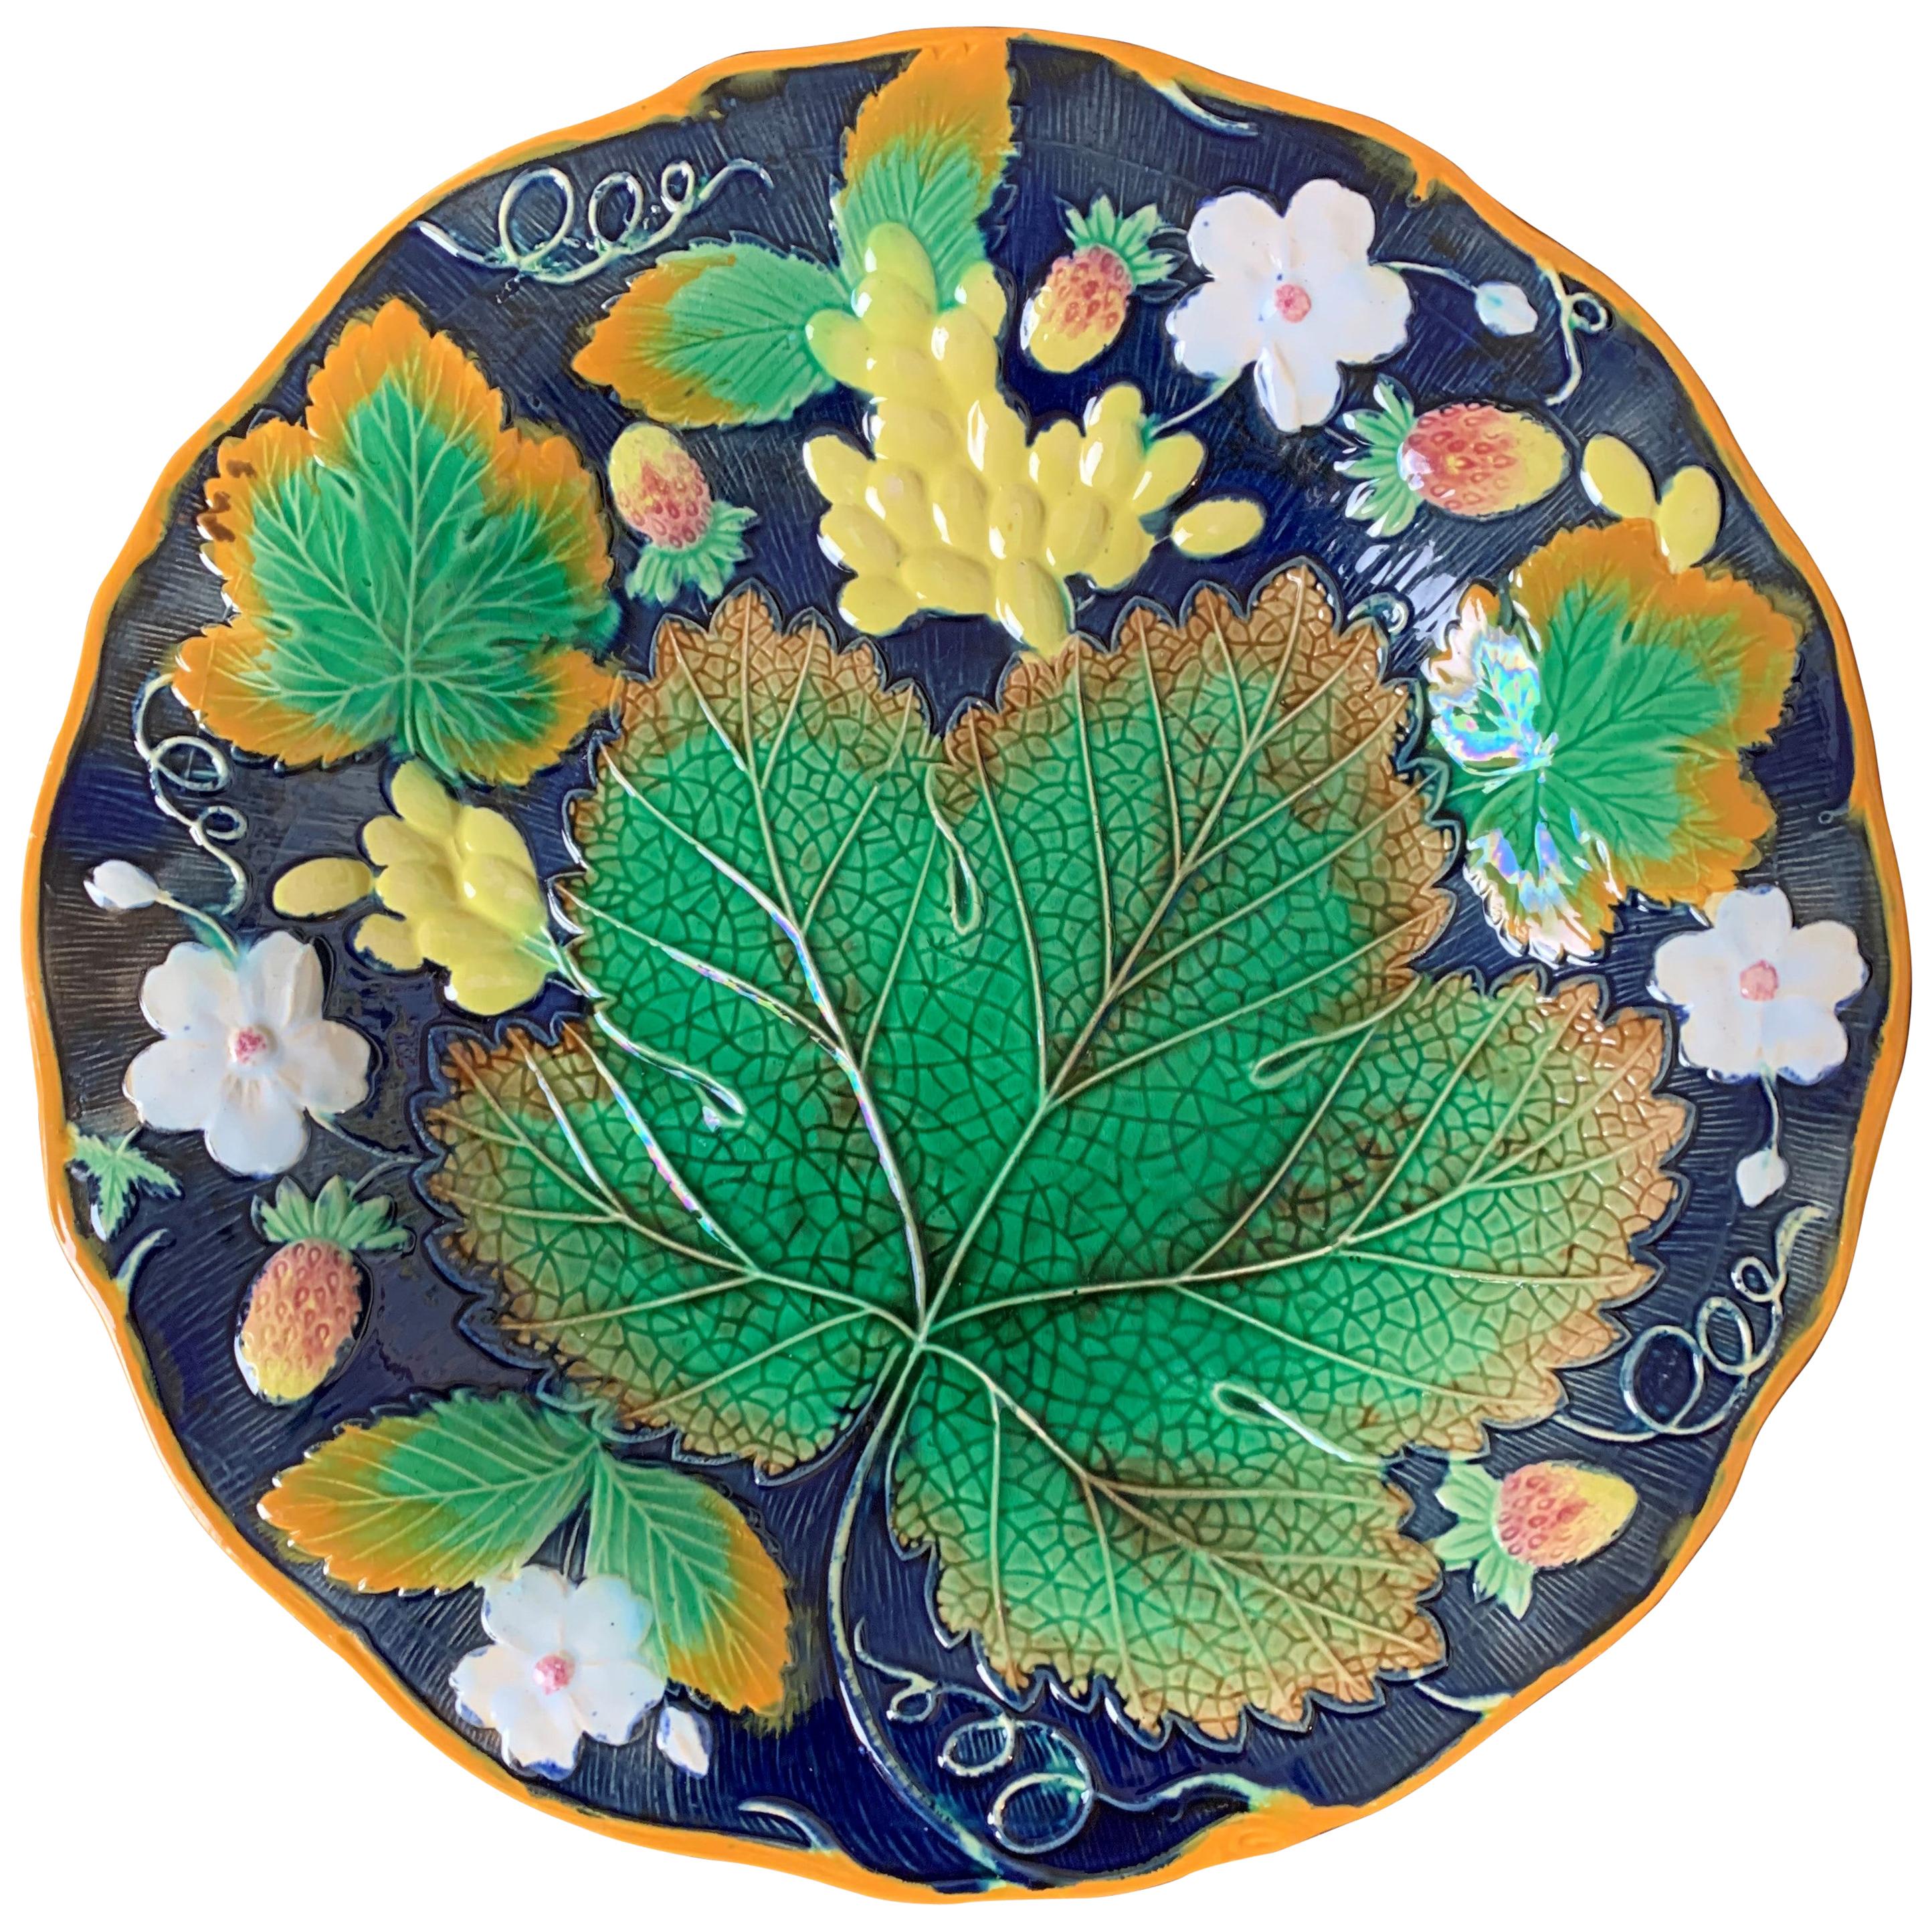 Wm. Brownfield Majolica Leaf and Strawberry Plate in Cobalt Blue, English, 1876